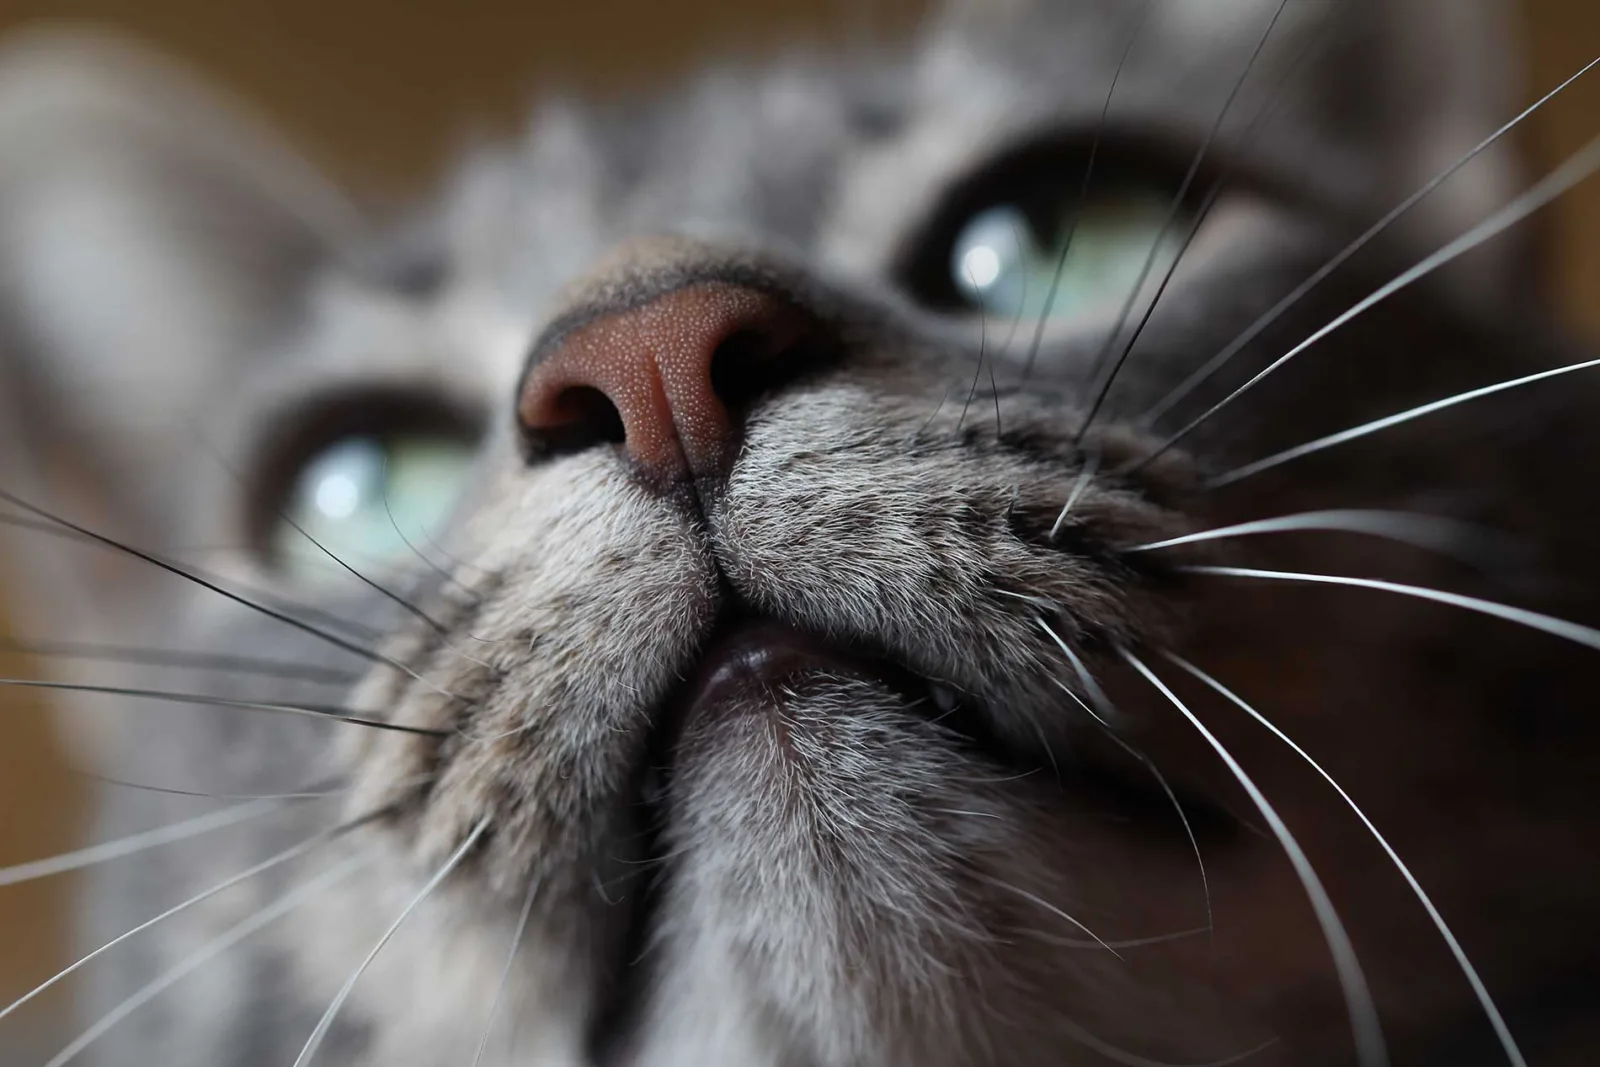 Close-up of a cat’s face, focusing on nose and whiskers. The whiskers are prominently displayed, radiating out from the cat’s muzzle, with fine details of their tapered structure visible against the background. The cat’s nose is textured and soft, adding to the tactile richness of the image.